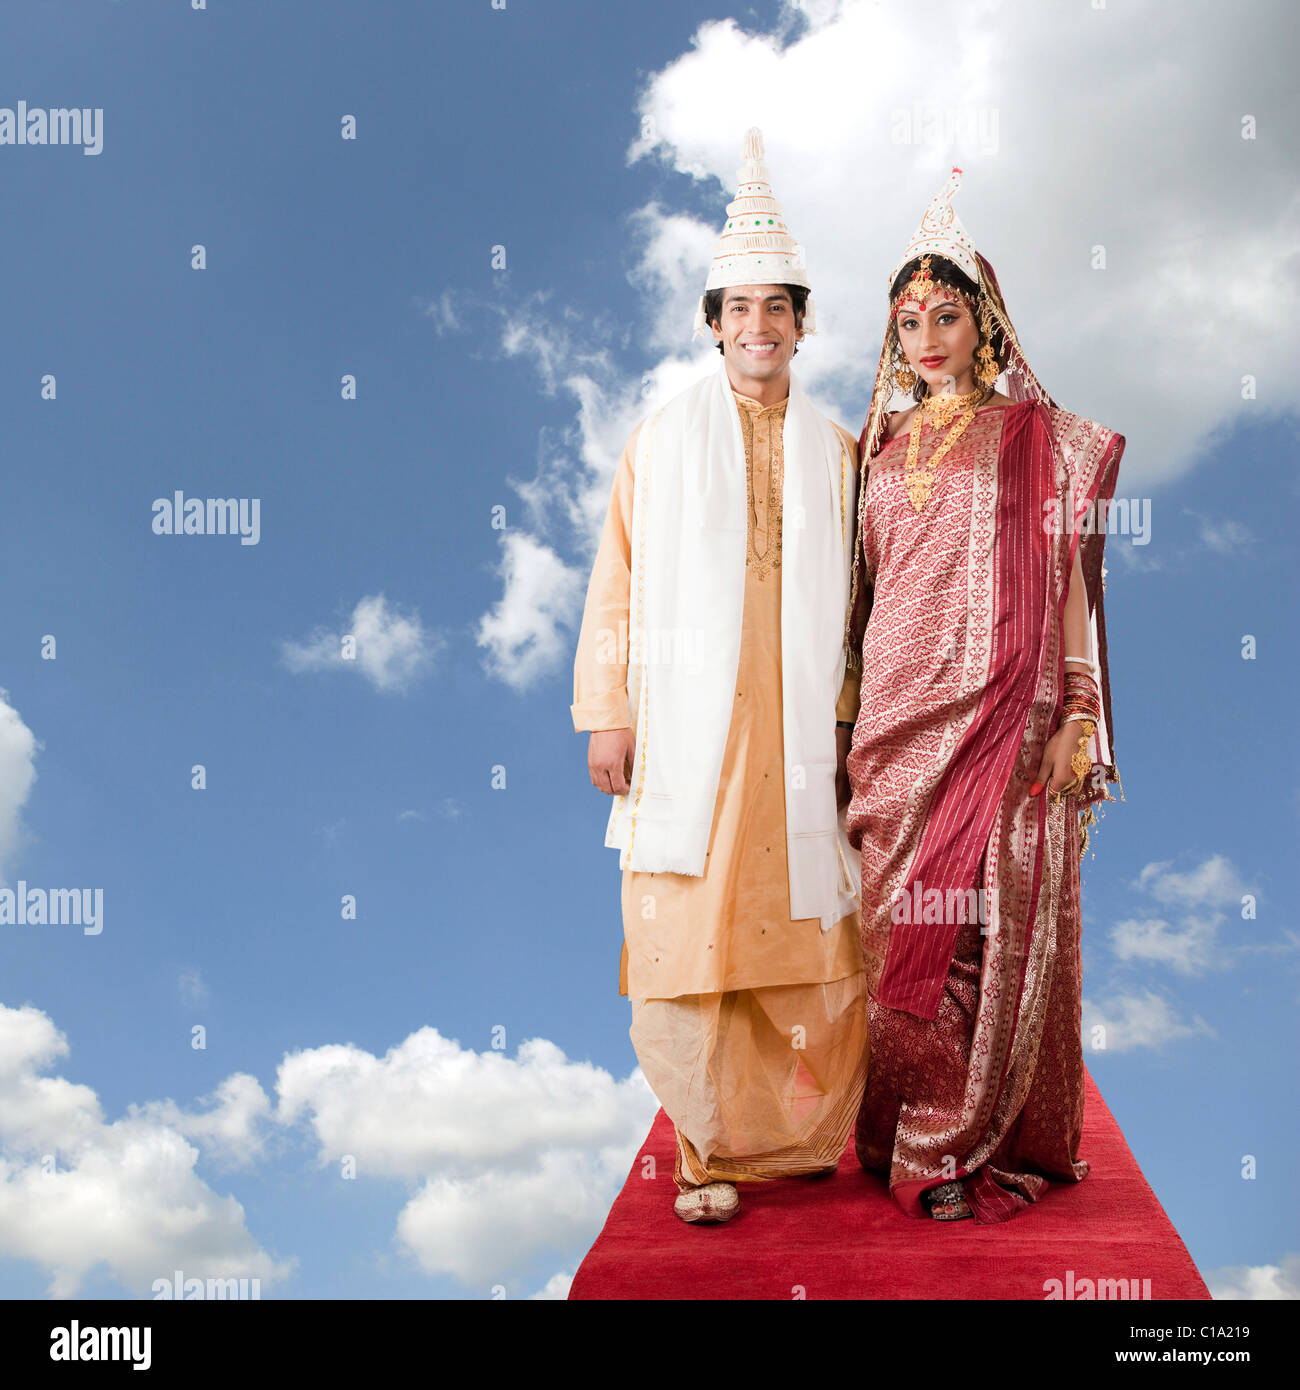 Newlywed couple standing on a carpet in clouds Stock Photo